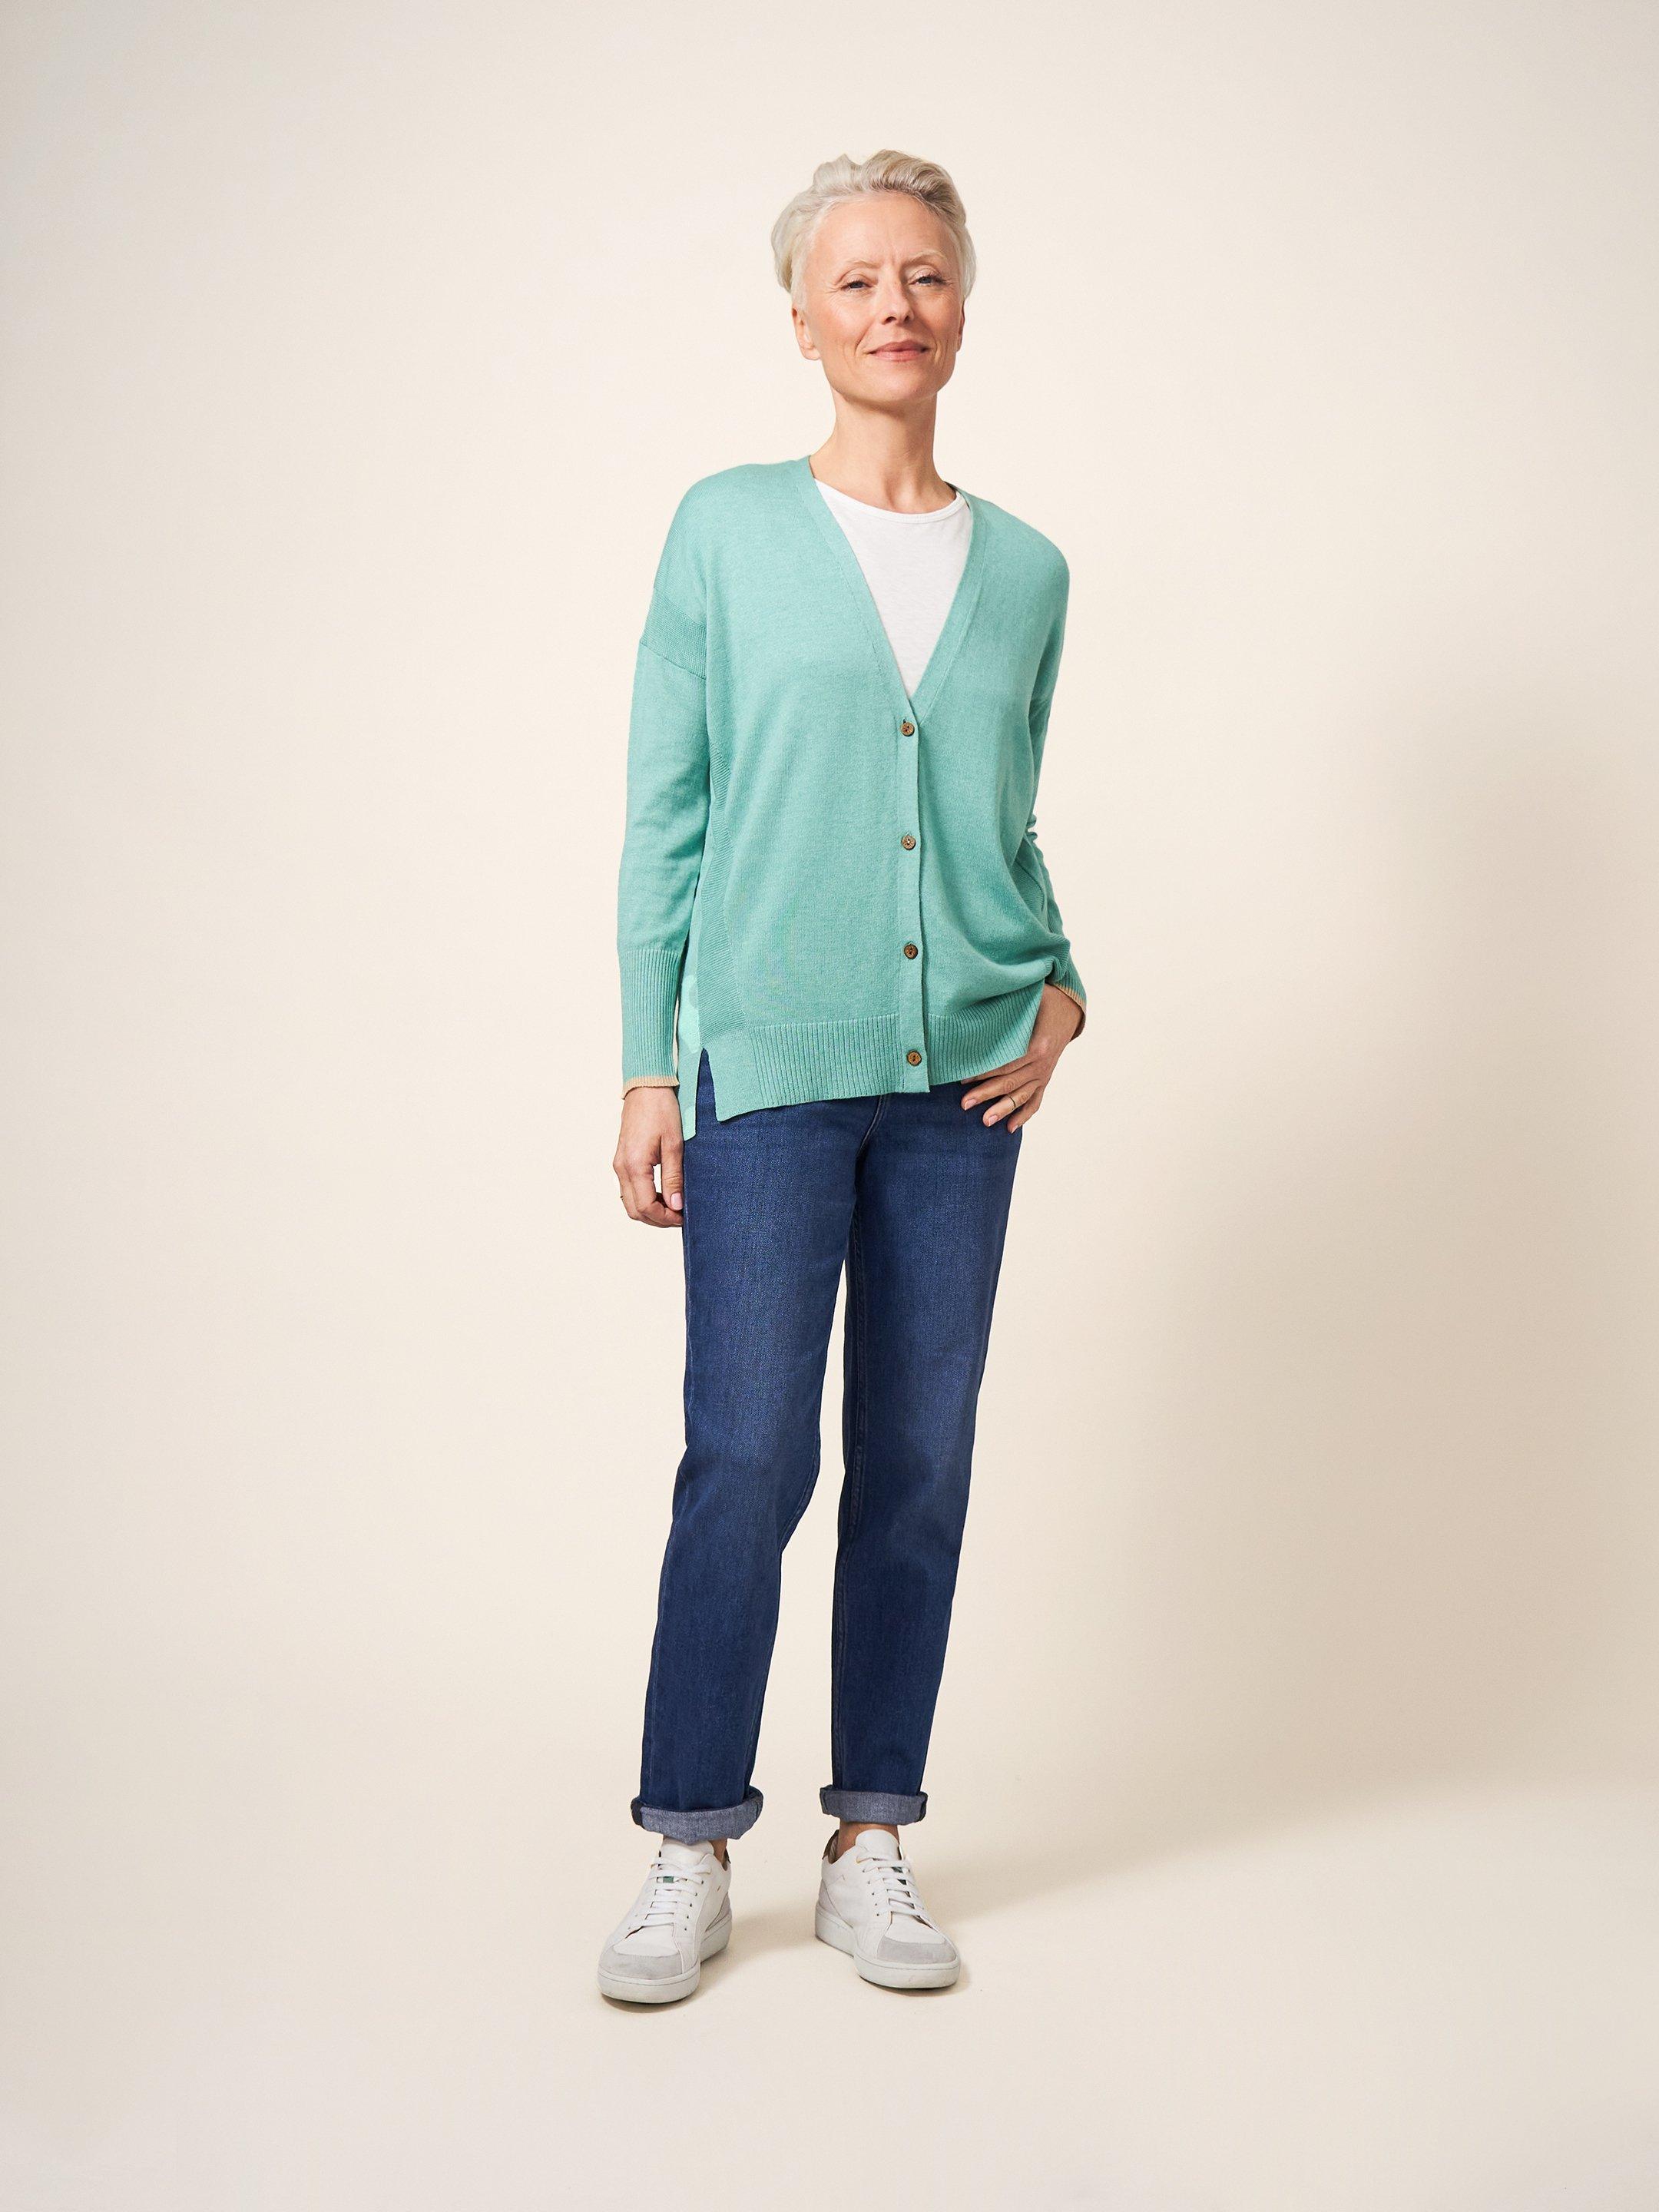 OLIVE CARDI in MID TEAL - MODEL FRONT